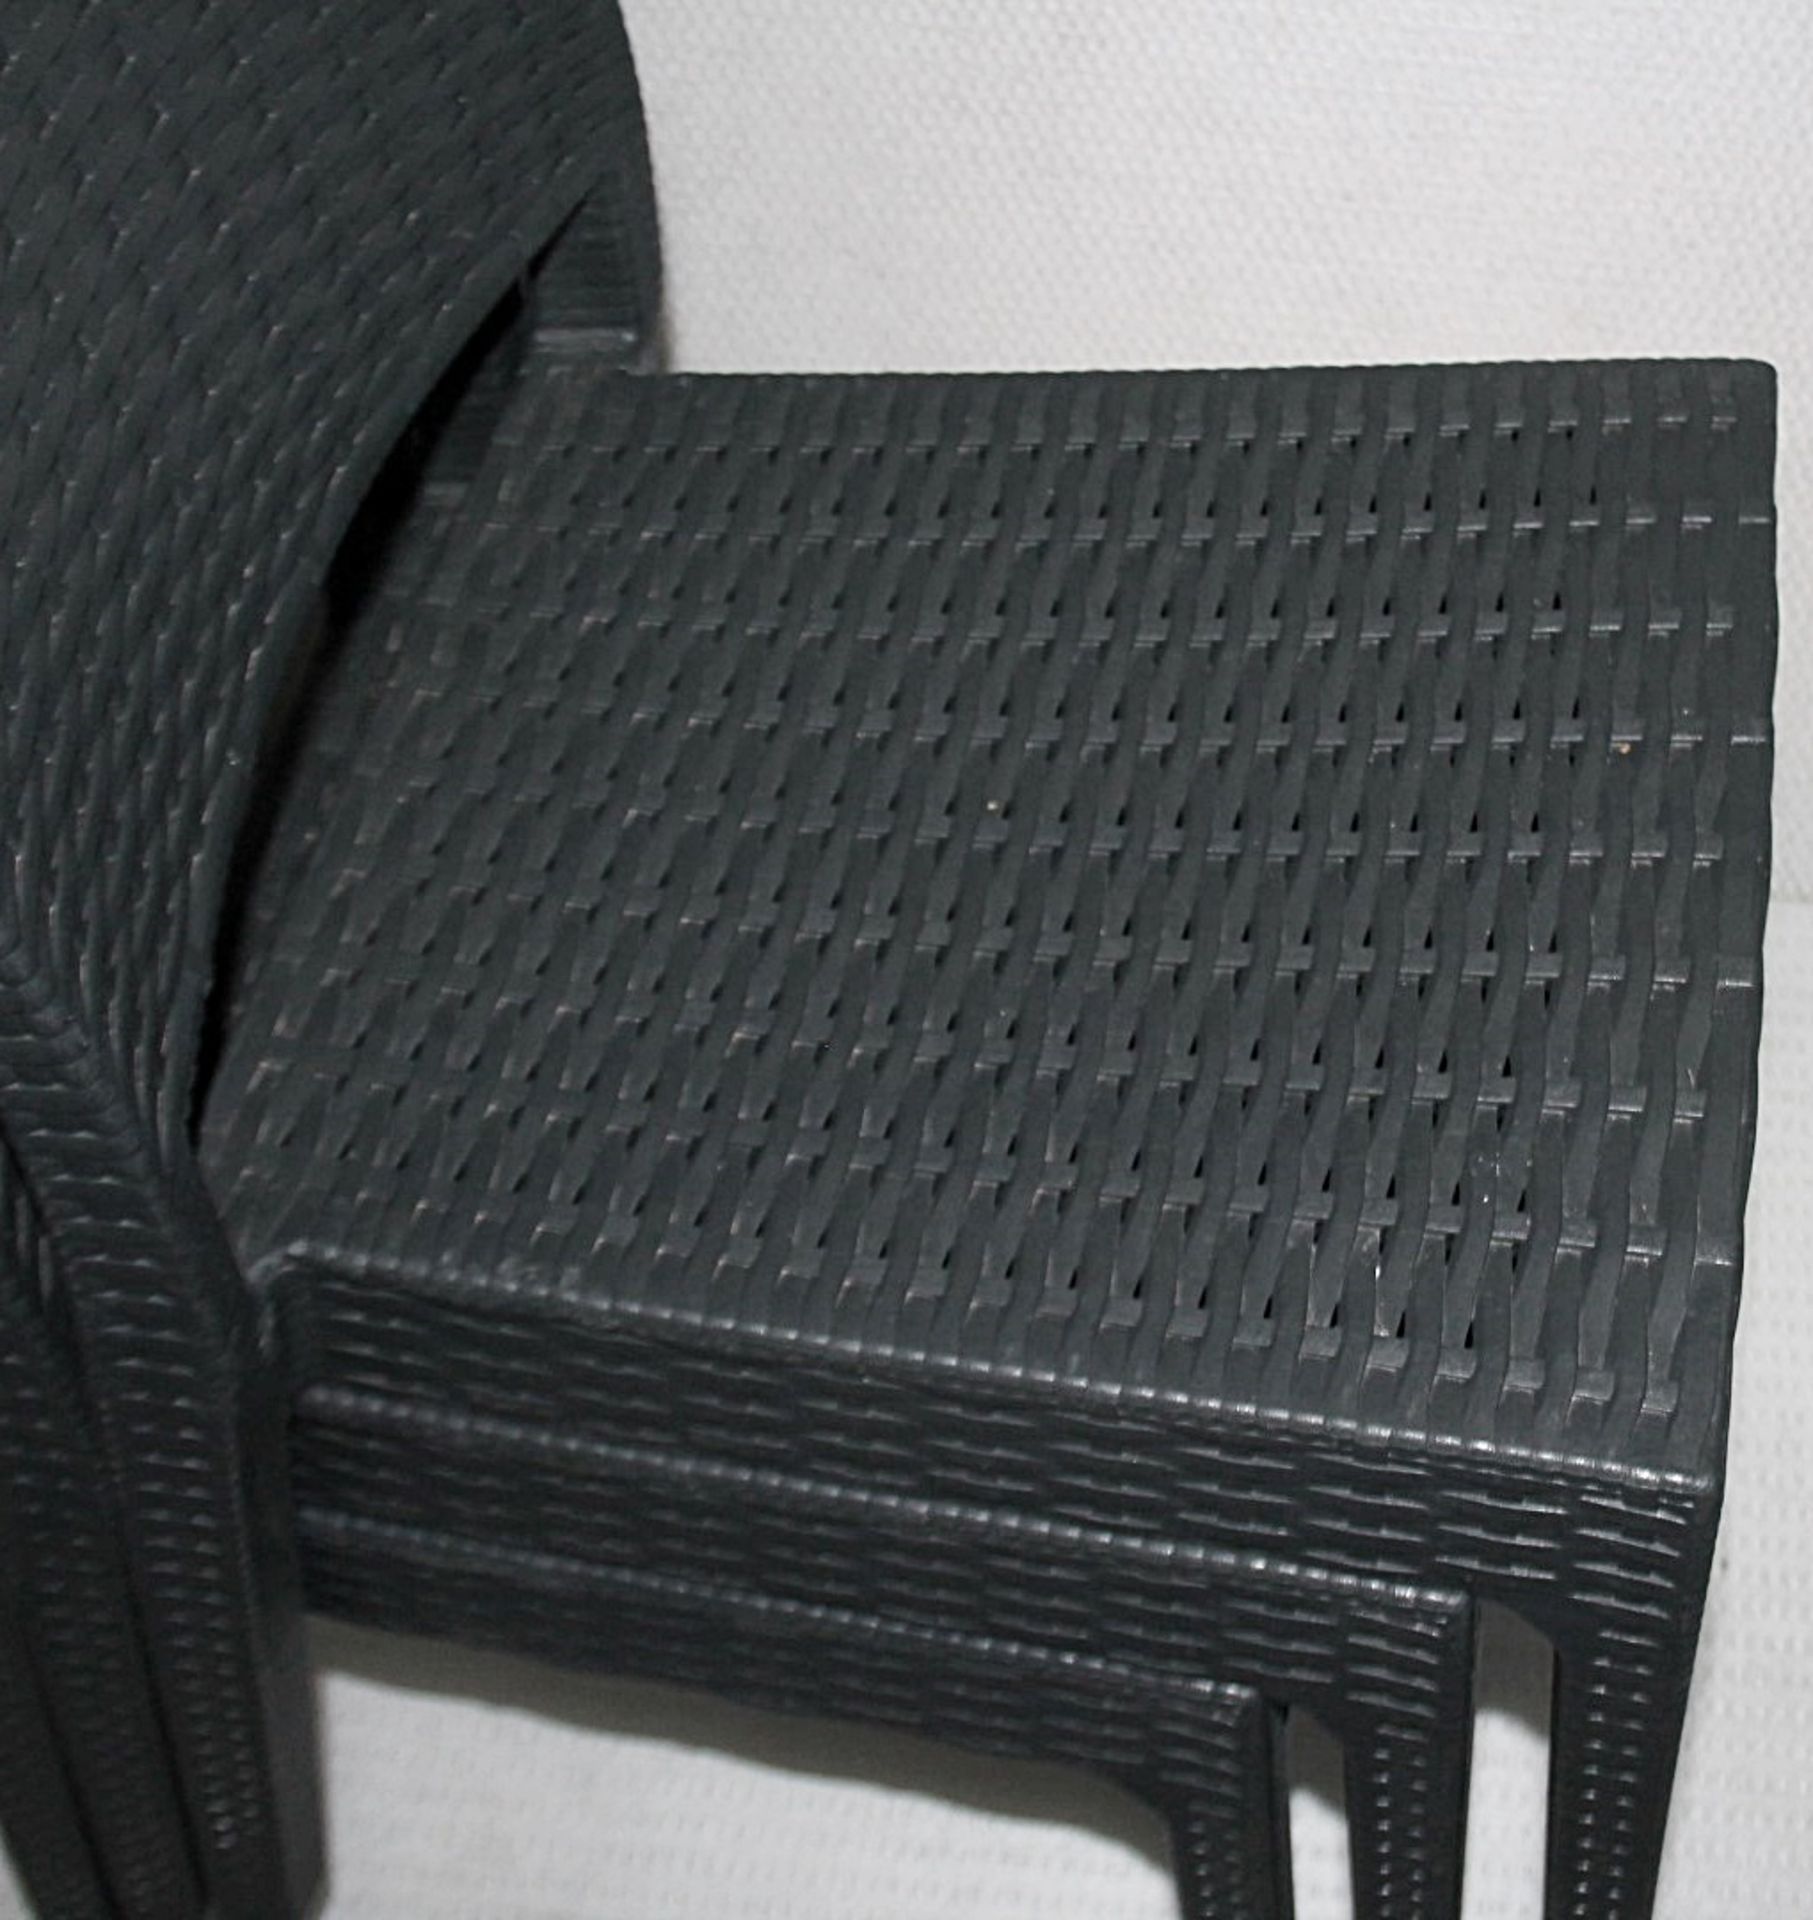 4 x SIESTA EXCLUSIVE 'Florida' Commercial Stackable Rattan-style Chairs In Dark Grey - CL987 - Total - Image 10 of 13